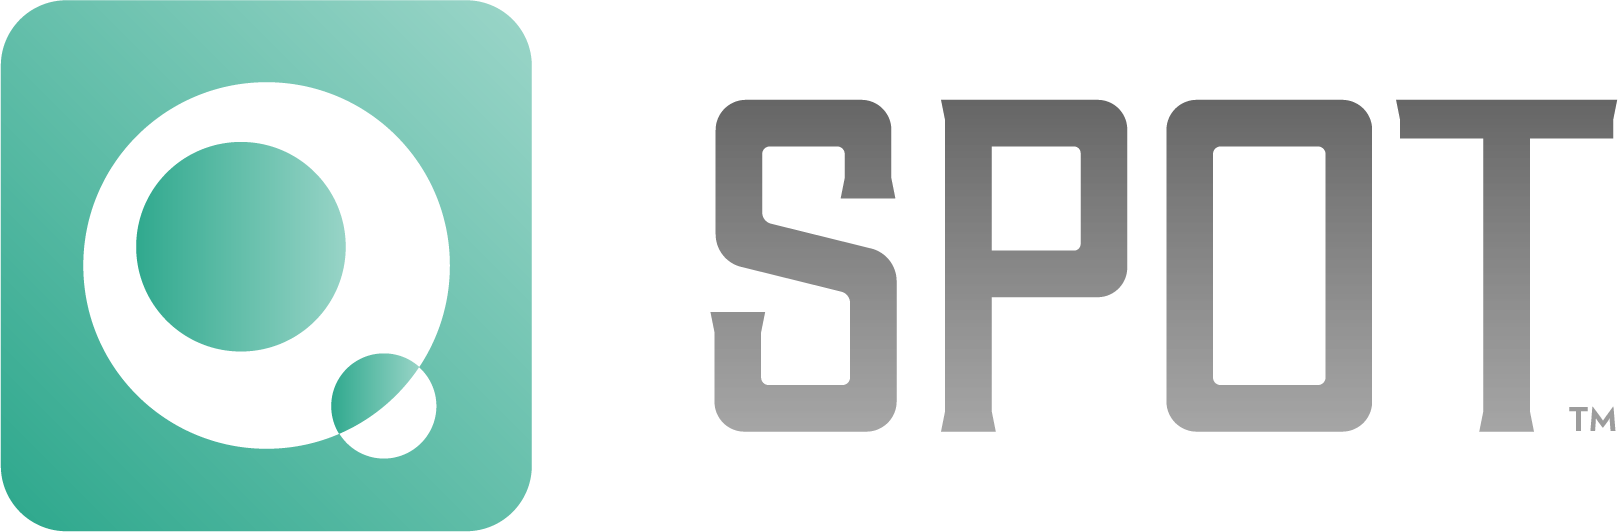 Spot Social Fitness, Inc, Wednesday, July 28, 2021, Press release picture